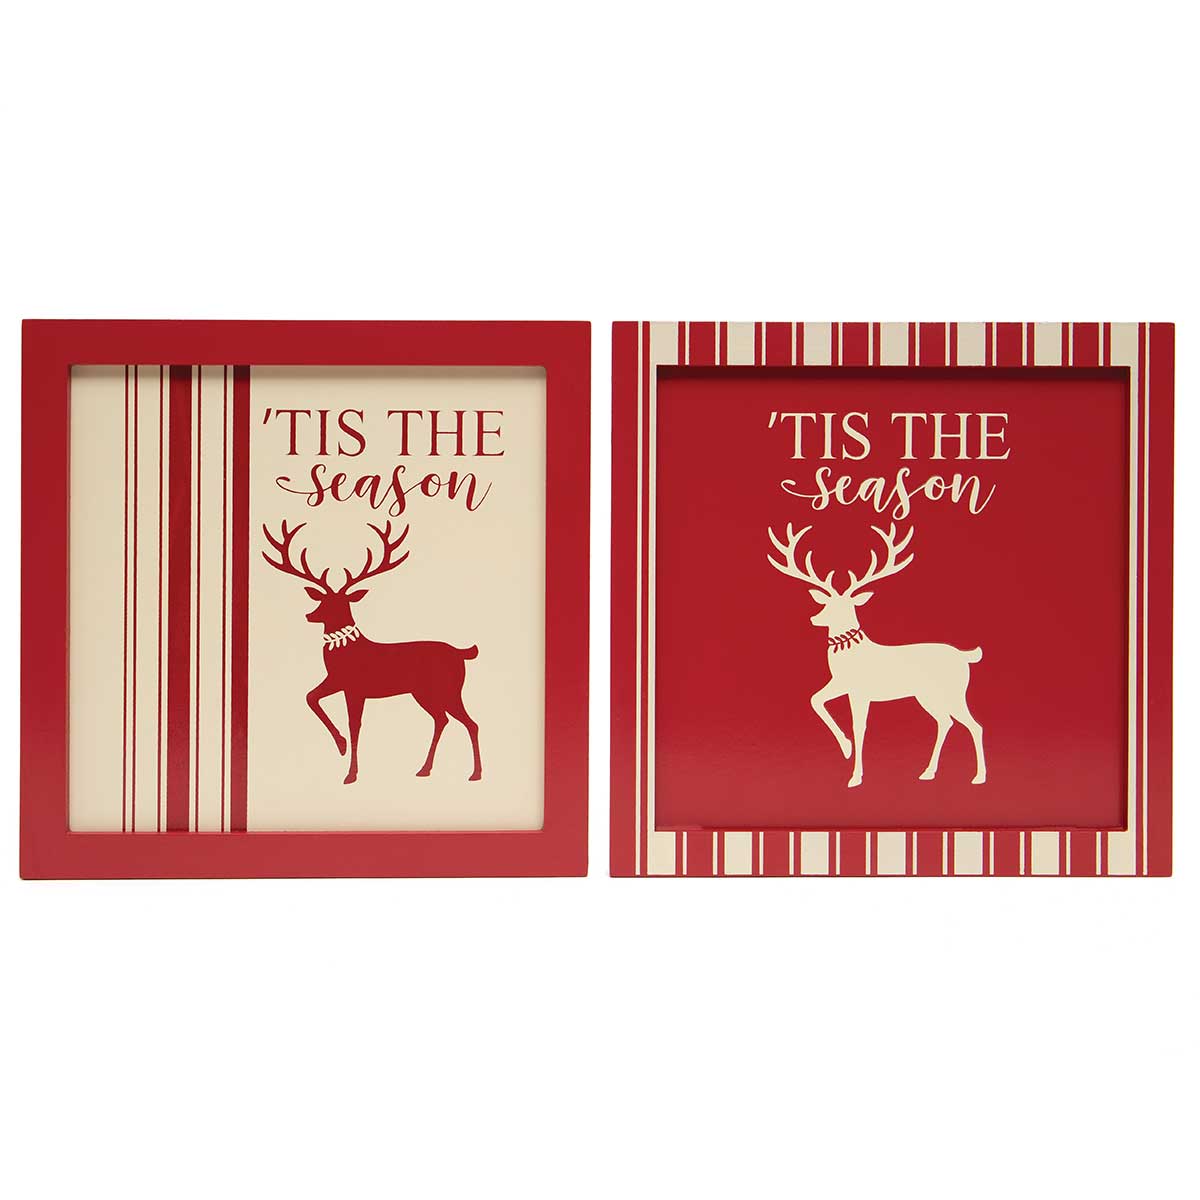 !TICKING TIS THE SEASON SQUARE WOOD SIGN RED/CREAM WITH b50